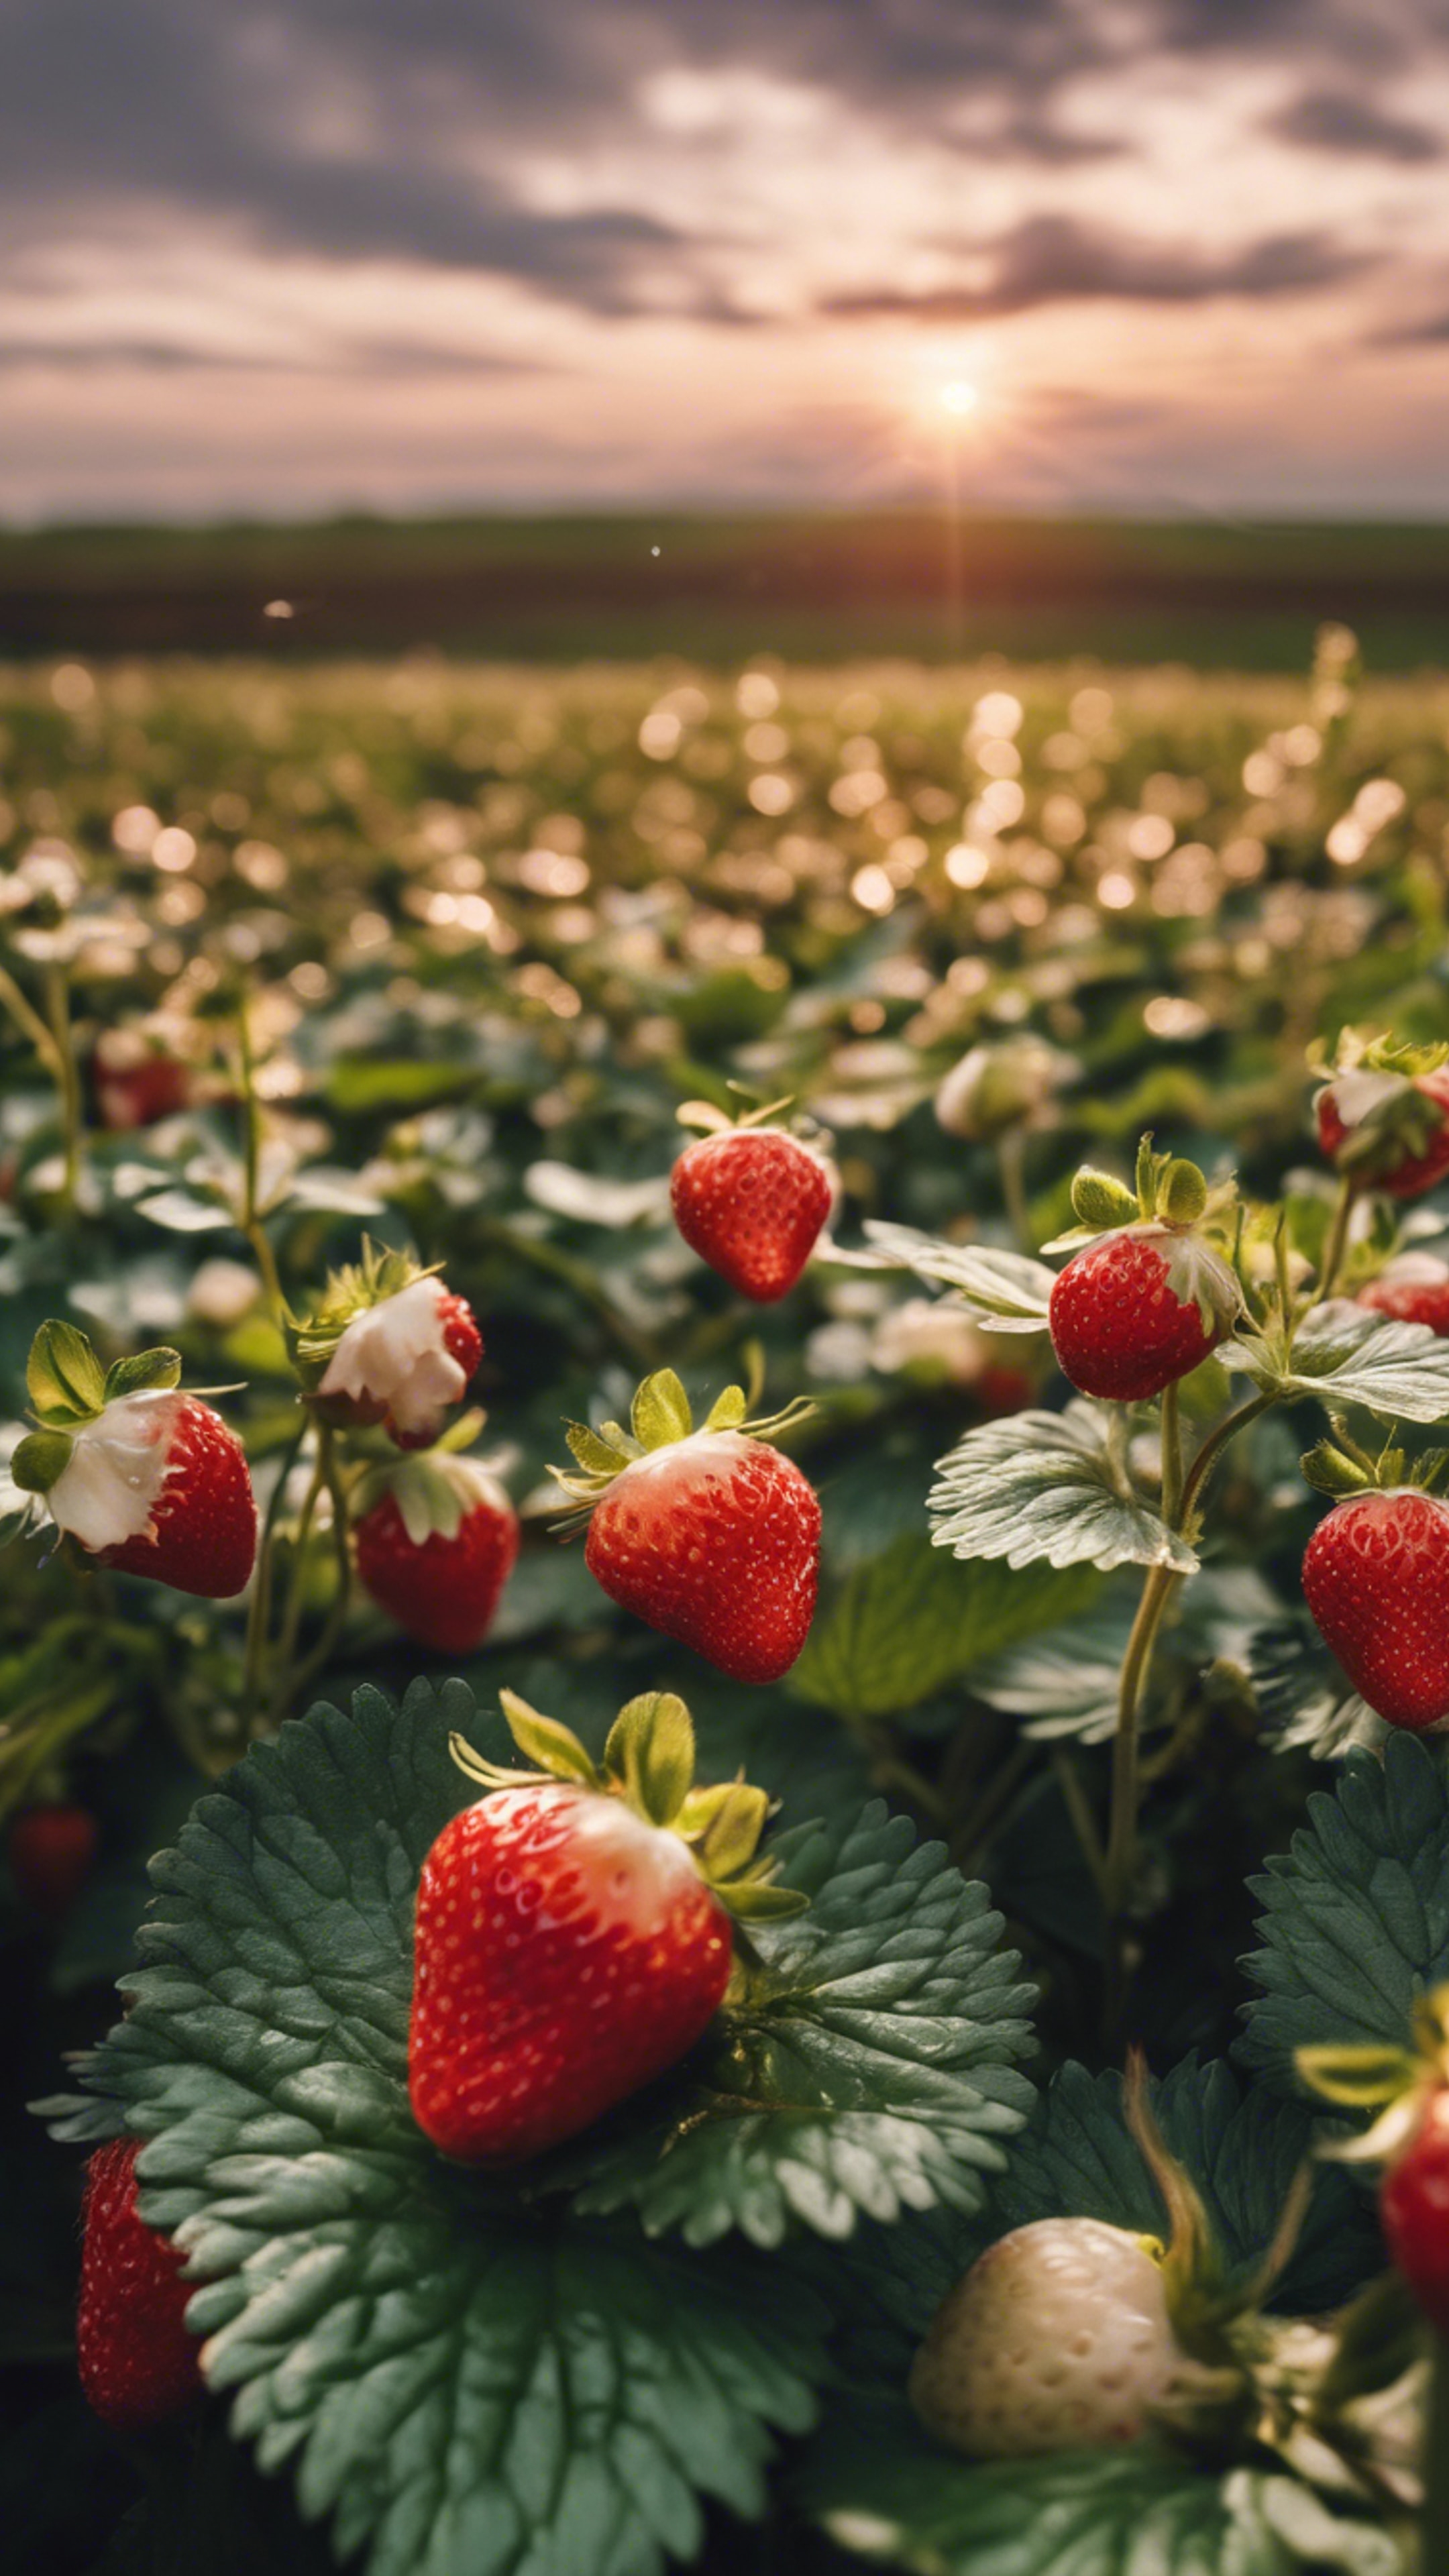 A romantic sunset view over a field of blooming strawberry plants.壁紙[3adde1a5bf4e4528ba85]